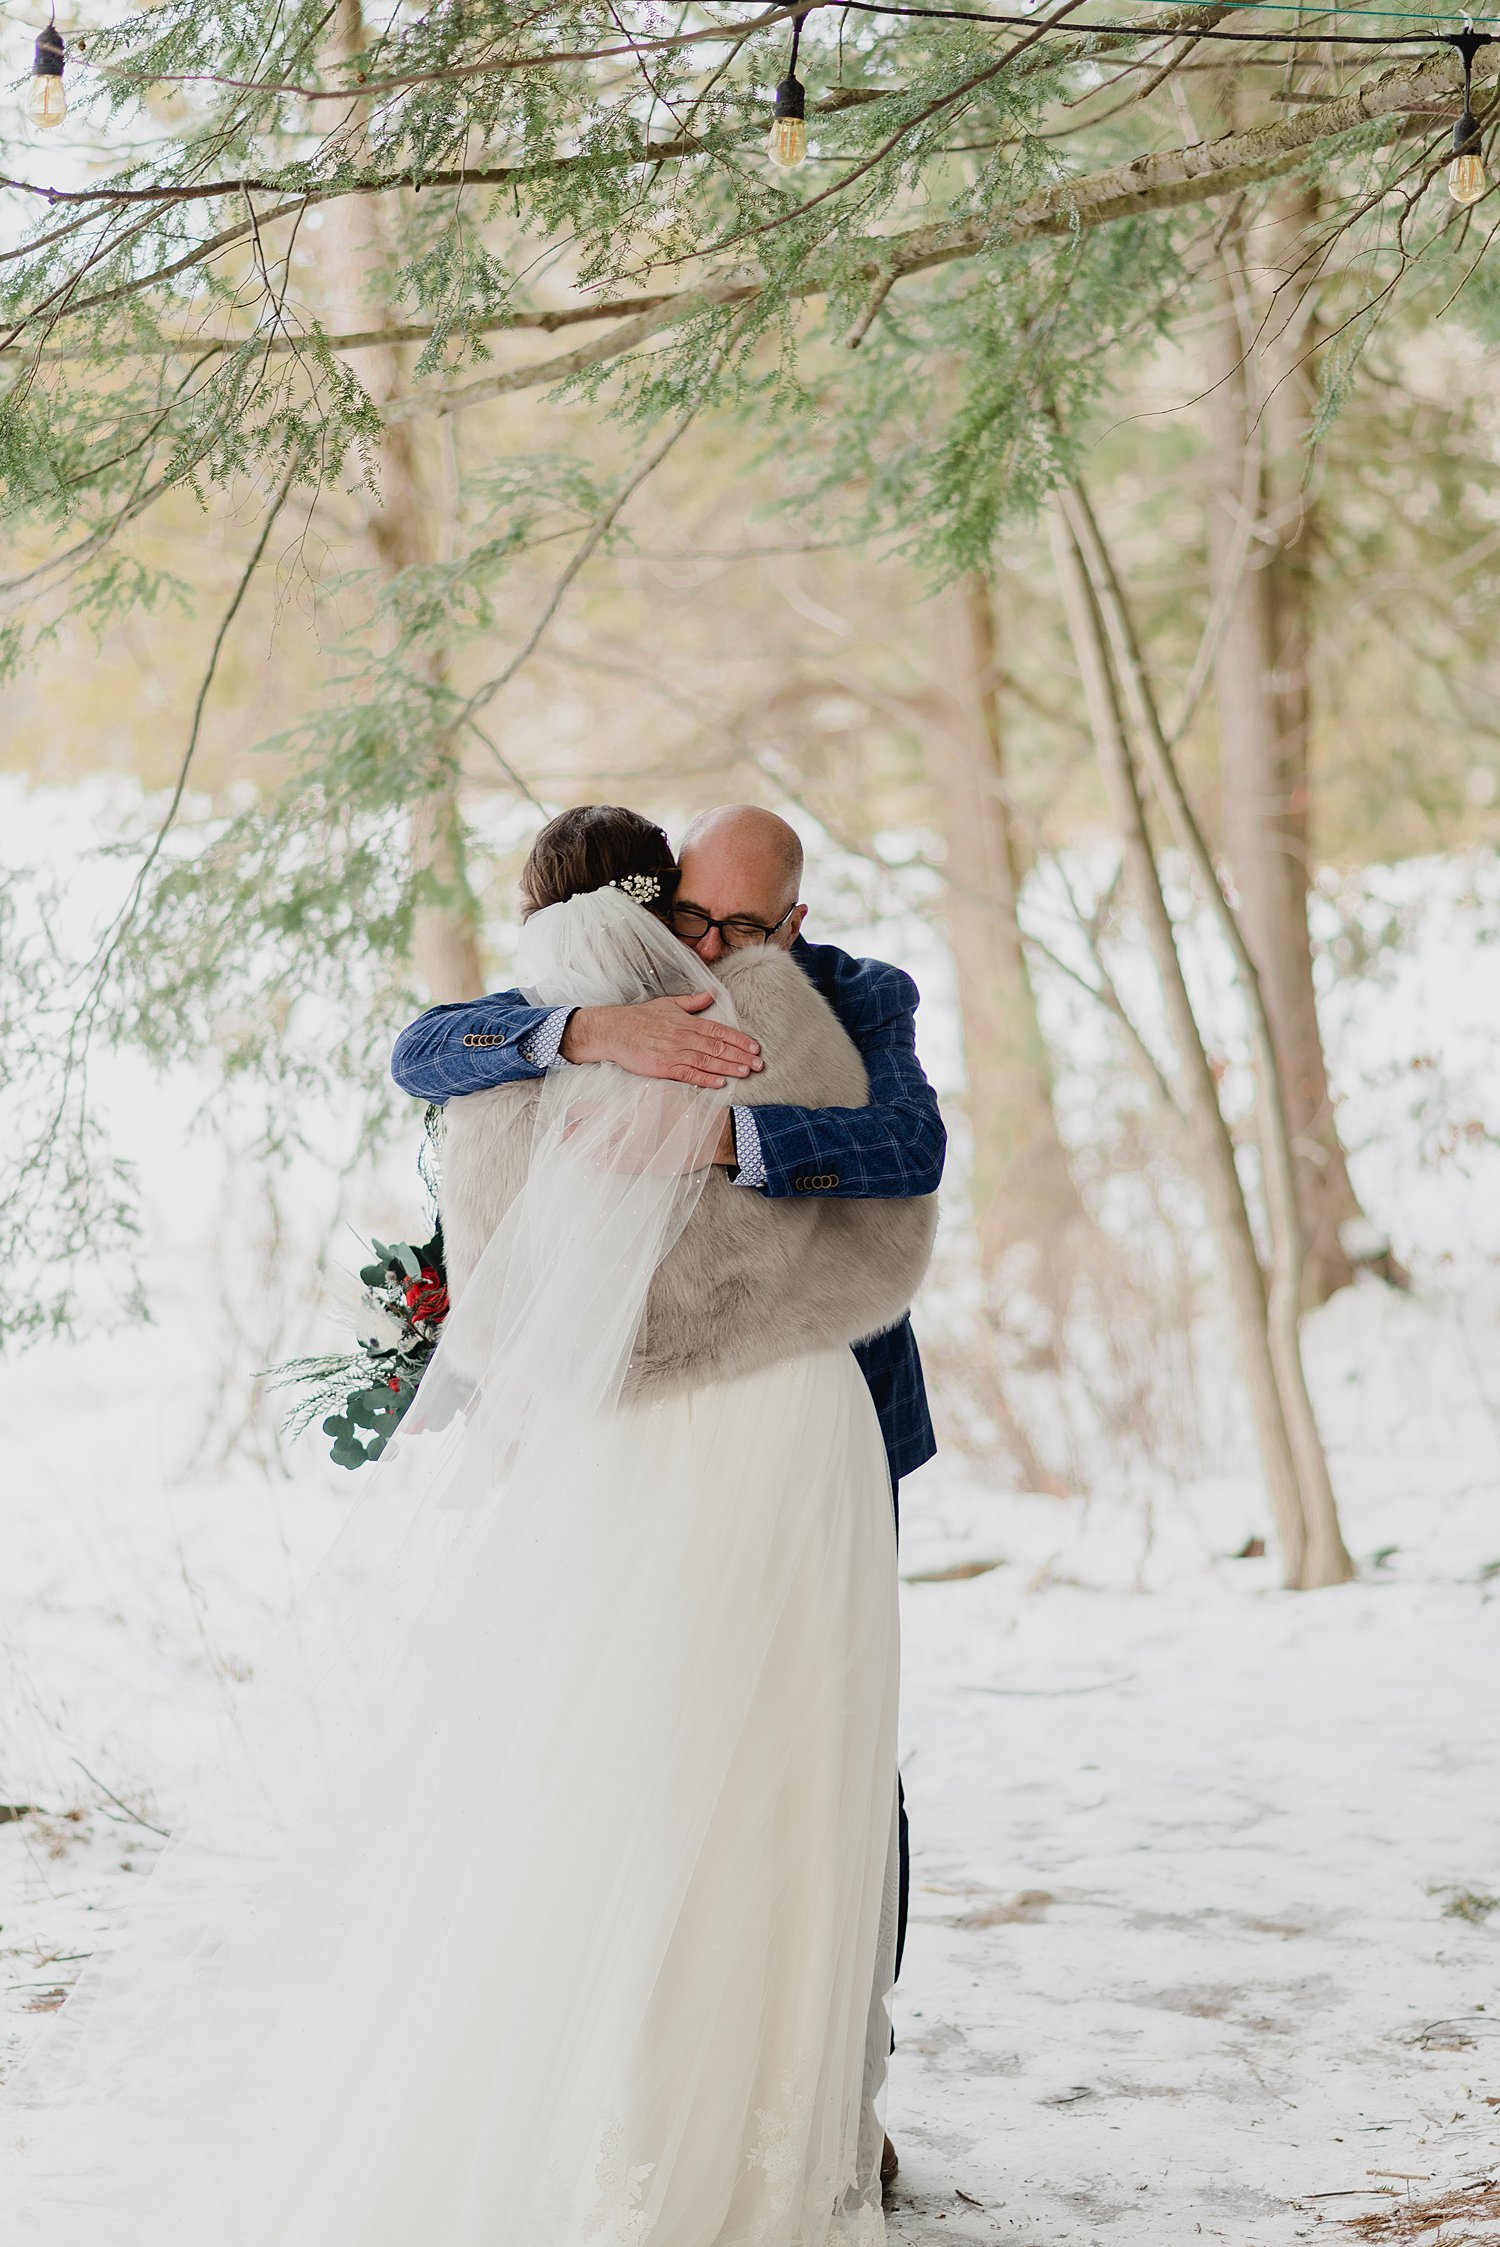 Intimate Winter Elopement at O'Hara Mill Homestead in Madoc, Ontario | Prince Edward County Wedding Photographer | Holly McMurter Photographs_0005.jpg